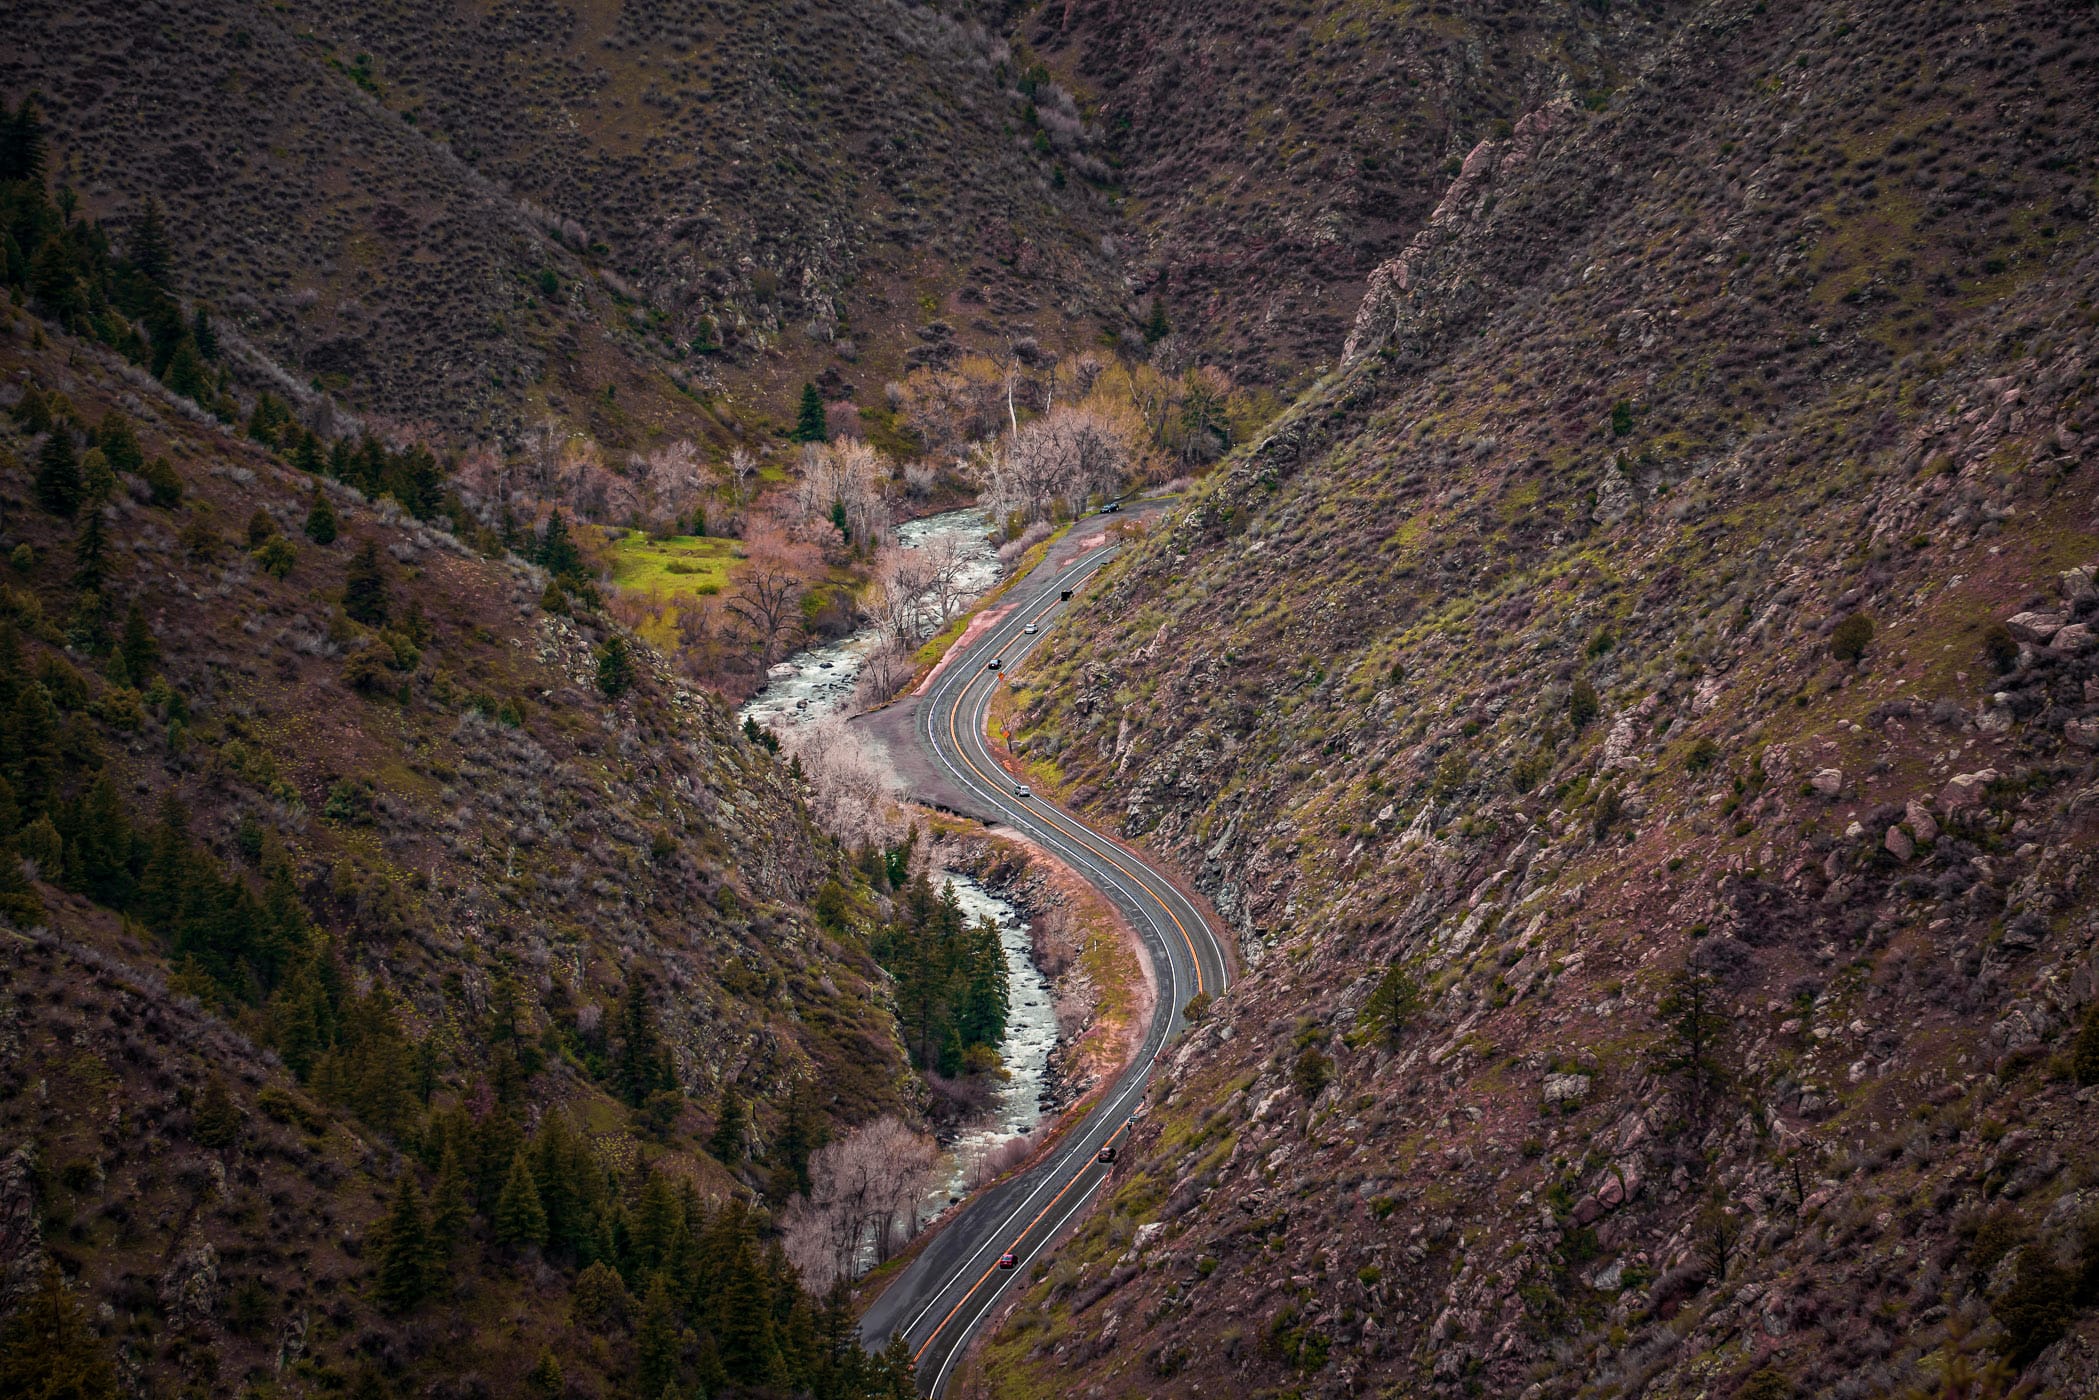 Clear Creek Canyon Road weaves through its namesake in the Rocky Mountains near Golden, Colorado.